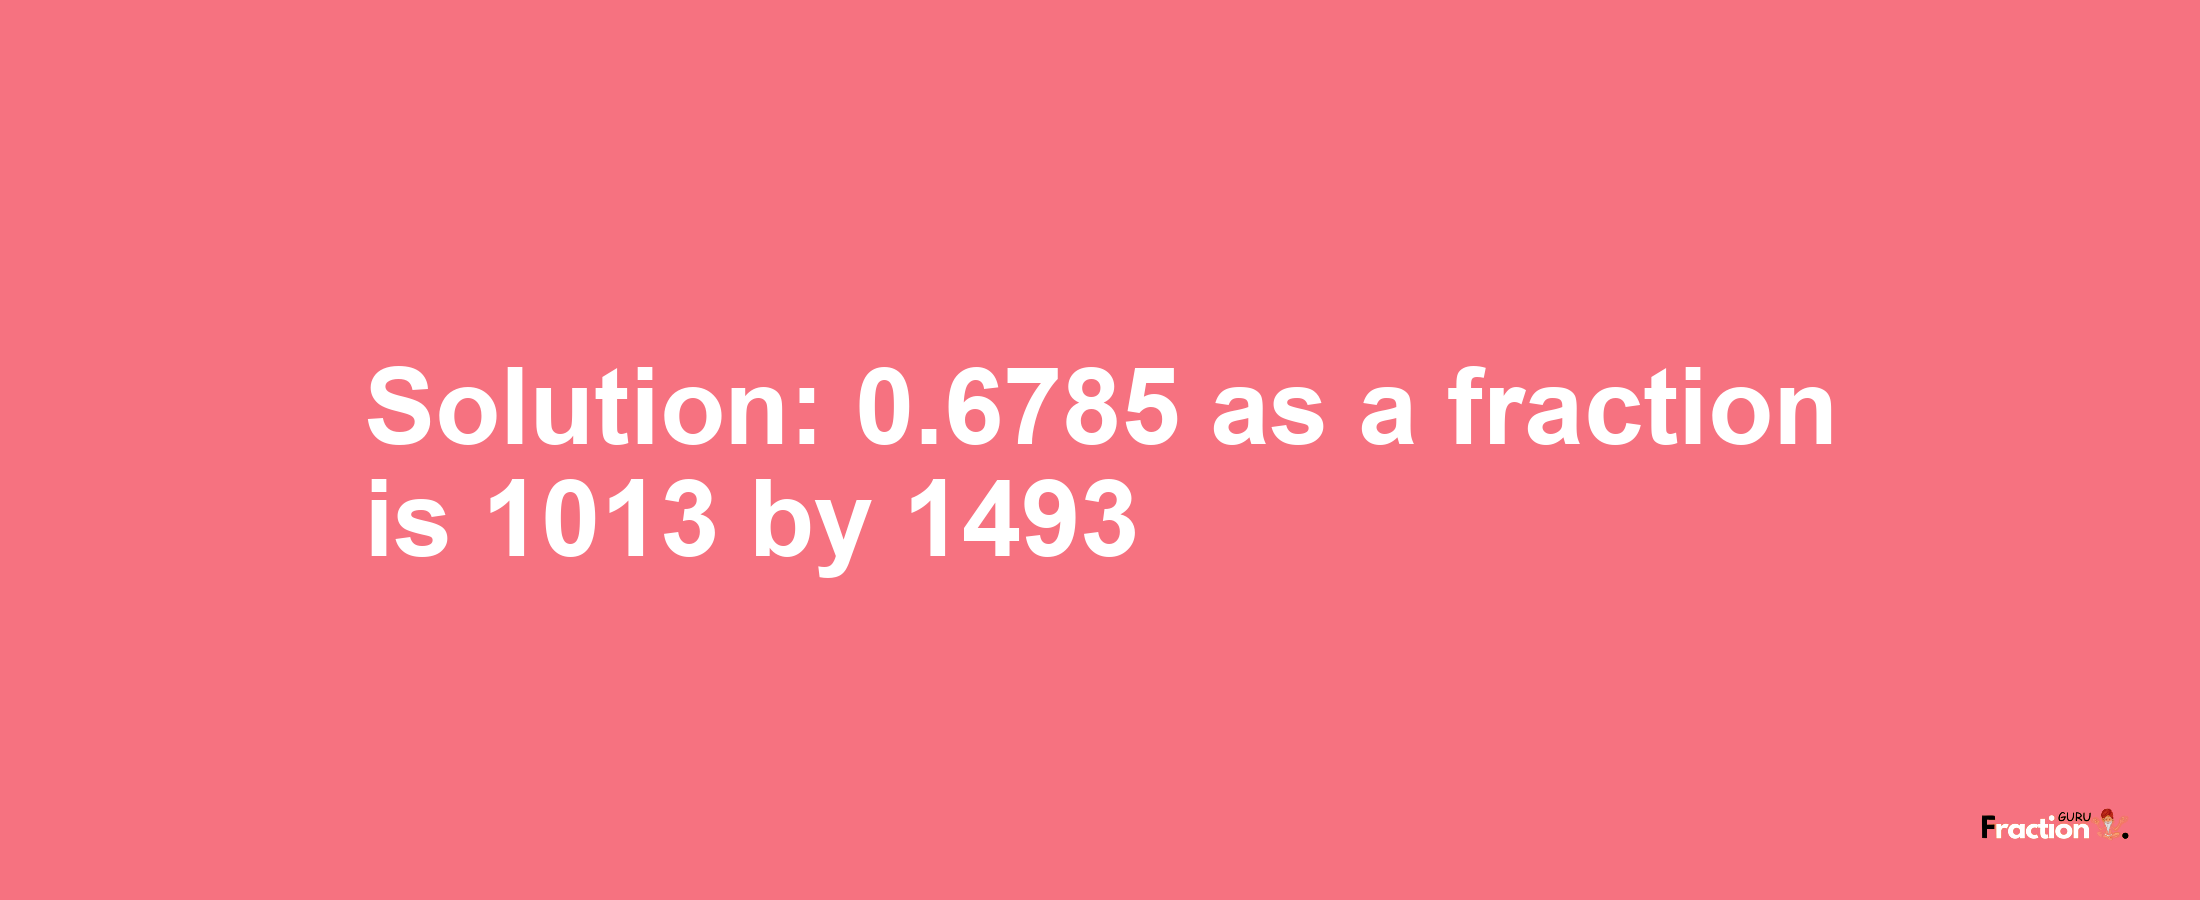 Solution:0.6785 as a fraction is 1013/1493